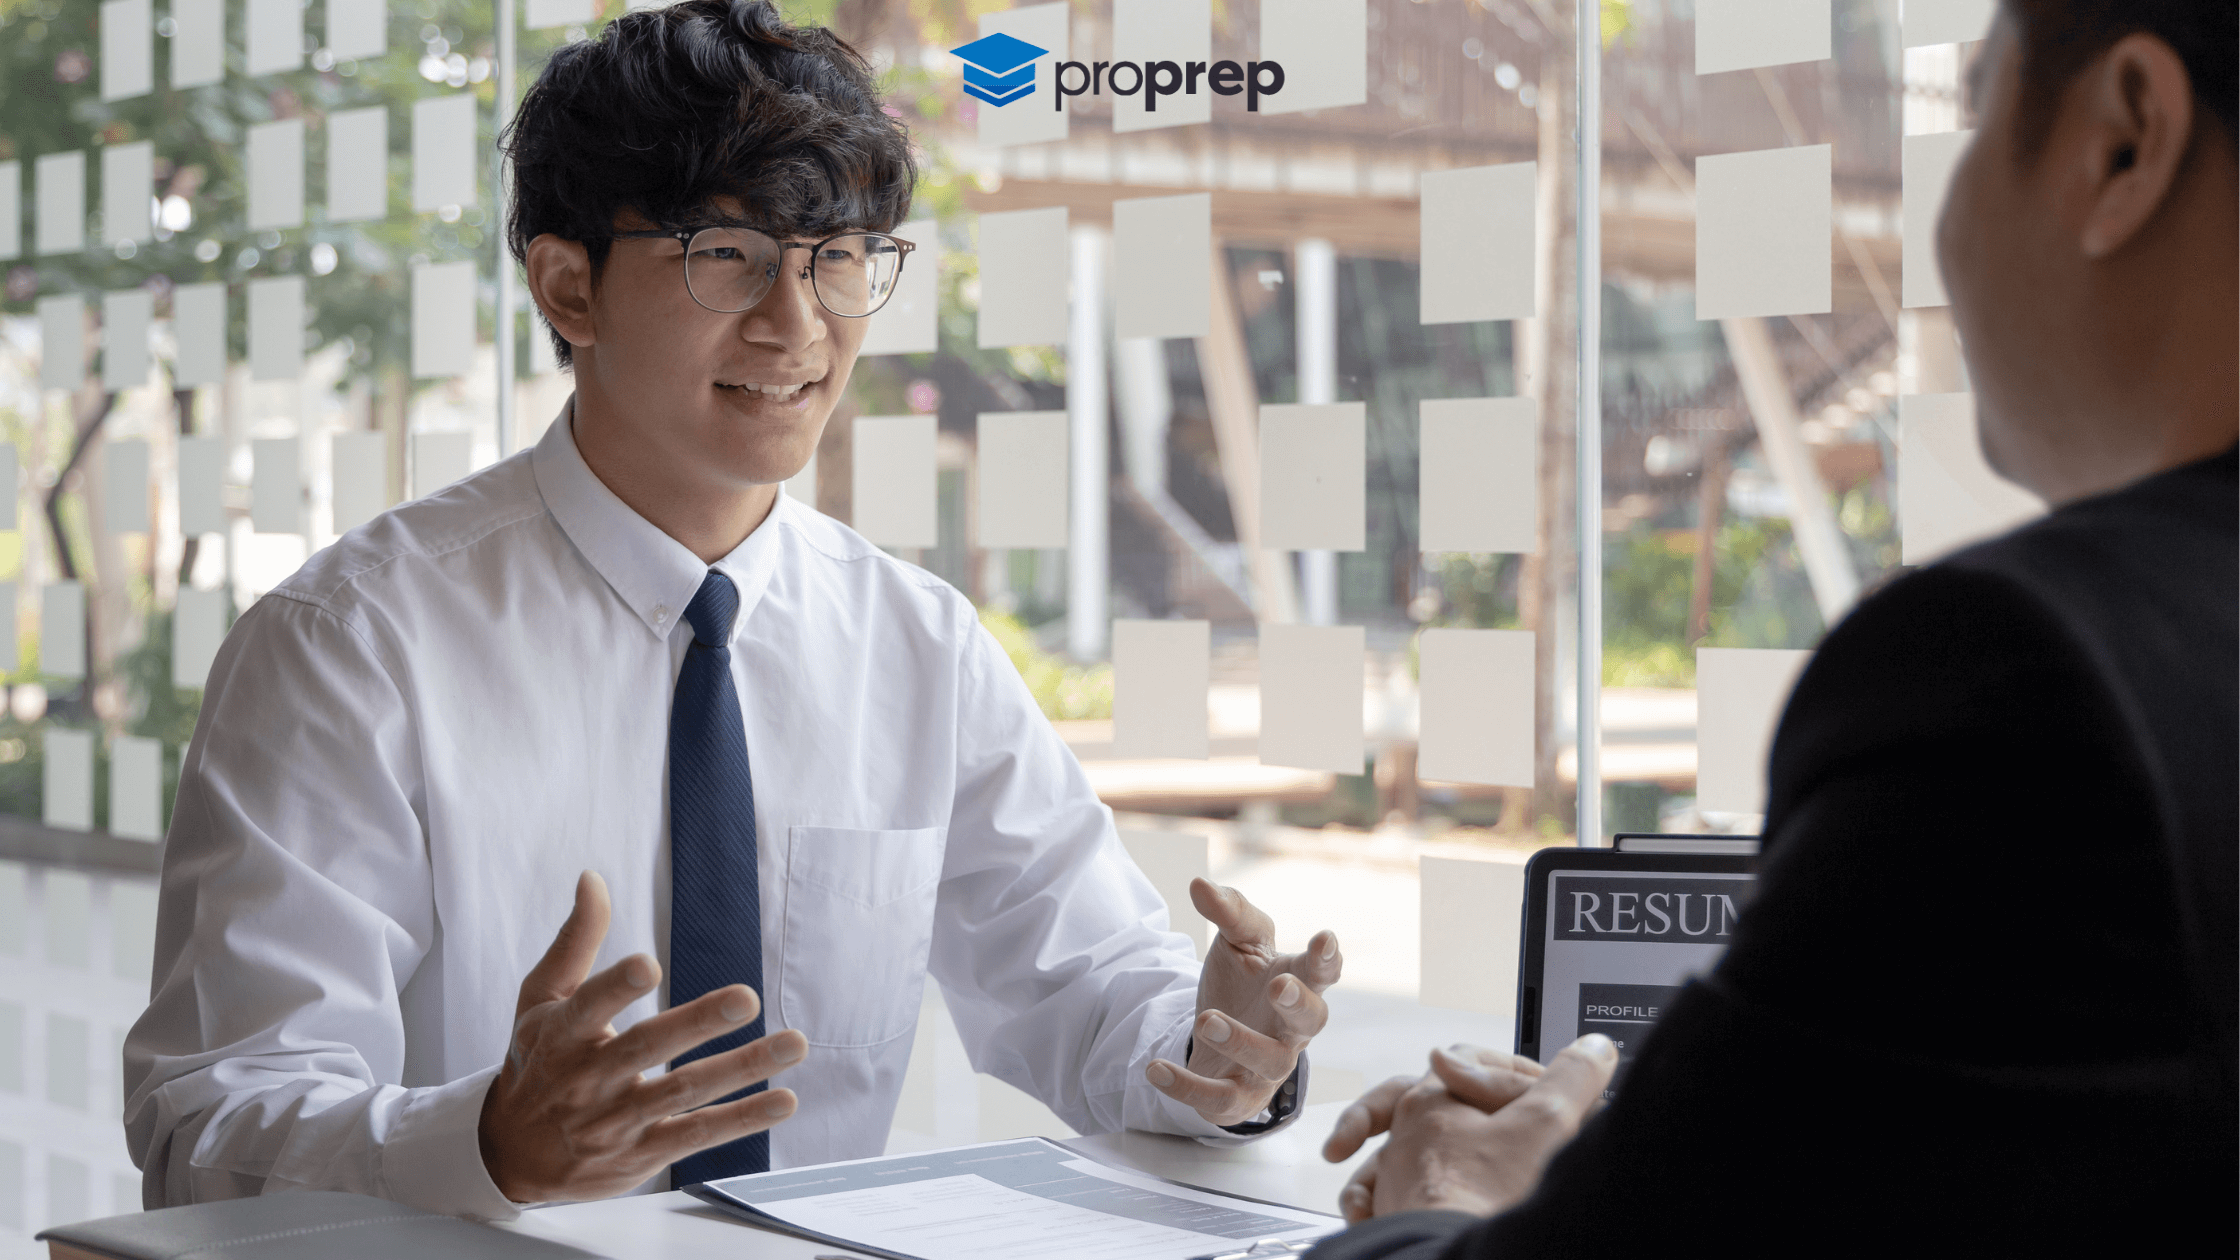 how to prepare interview student tips